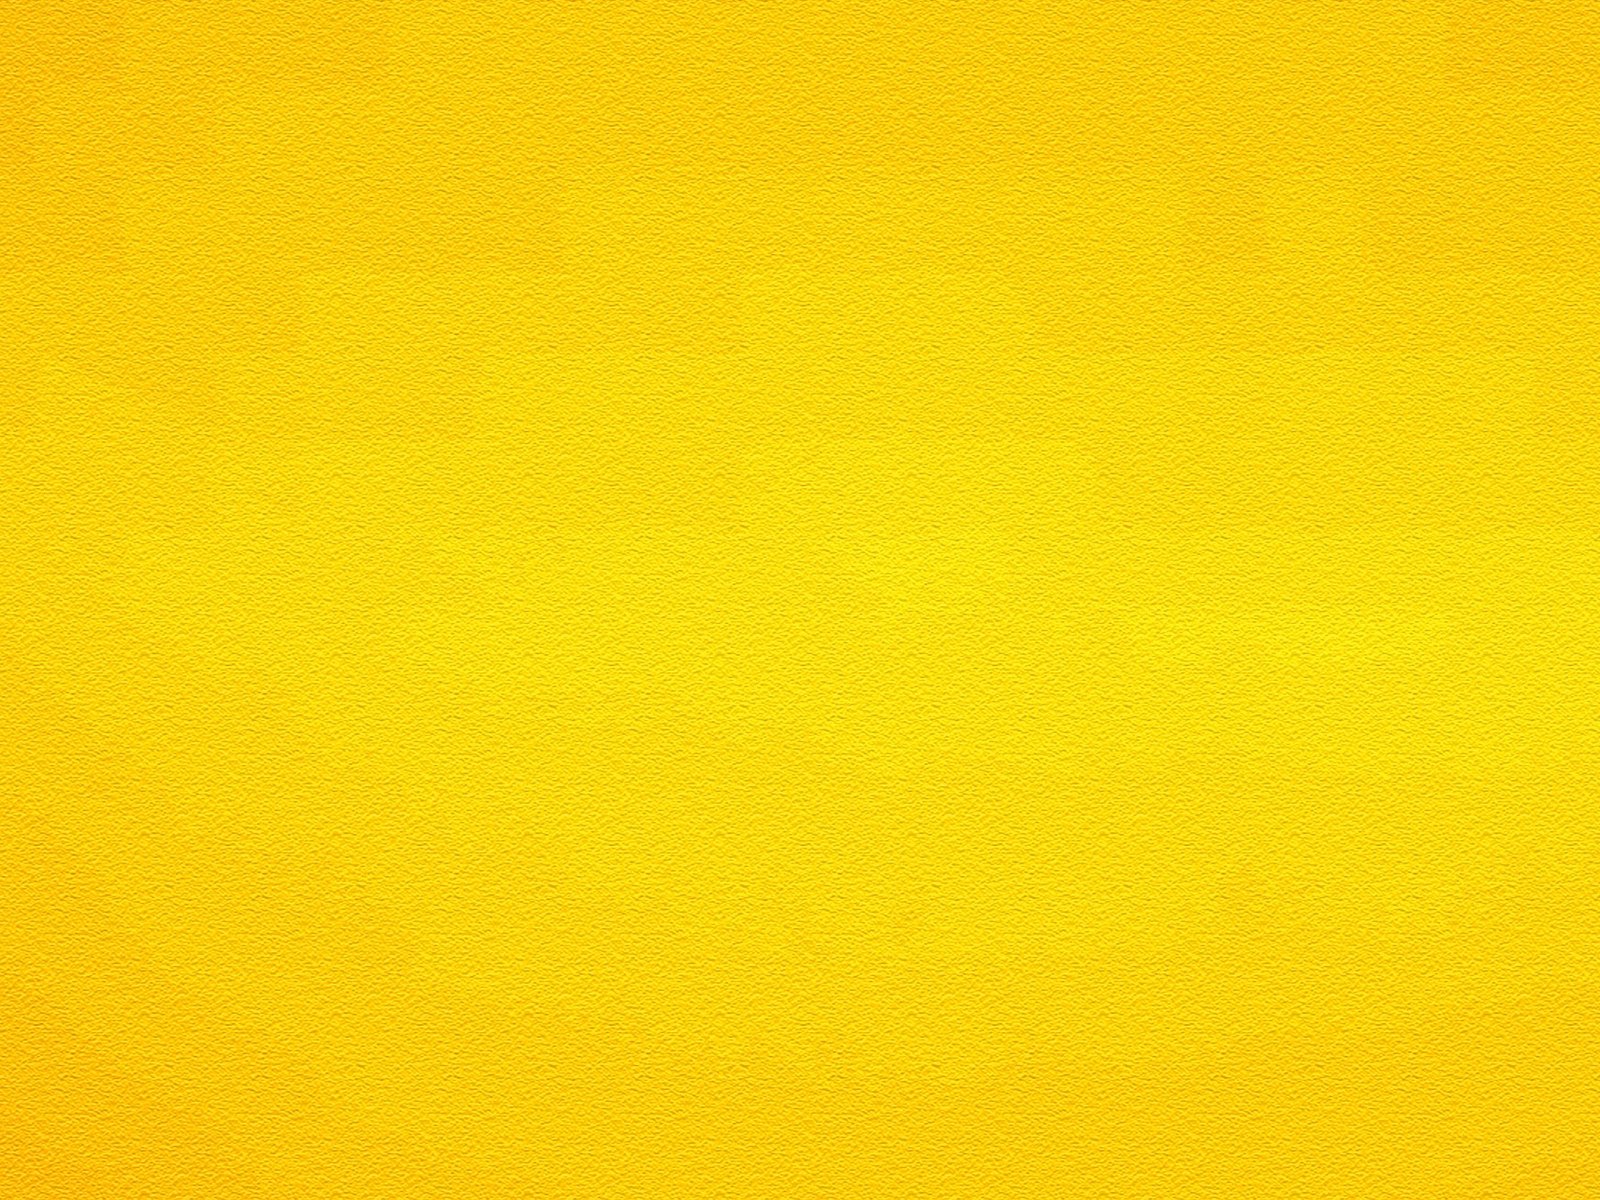 a wall is painted yellow and has no frame